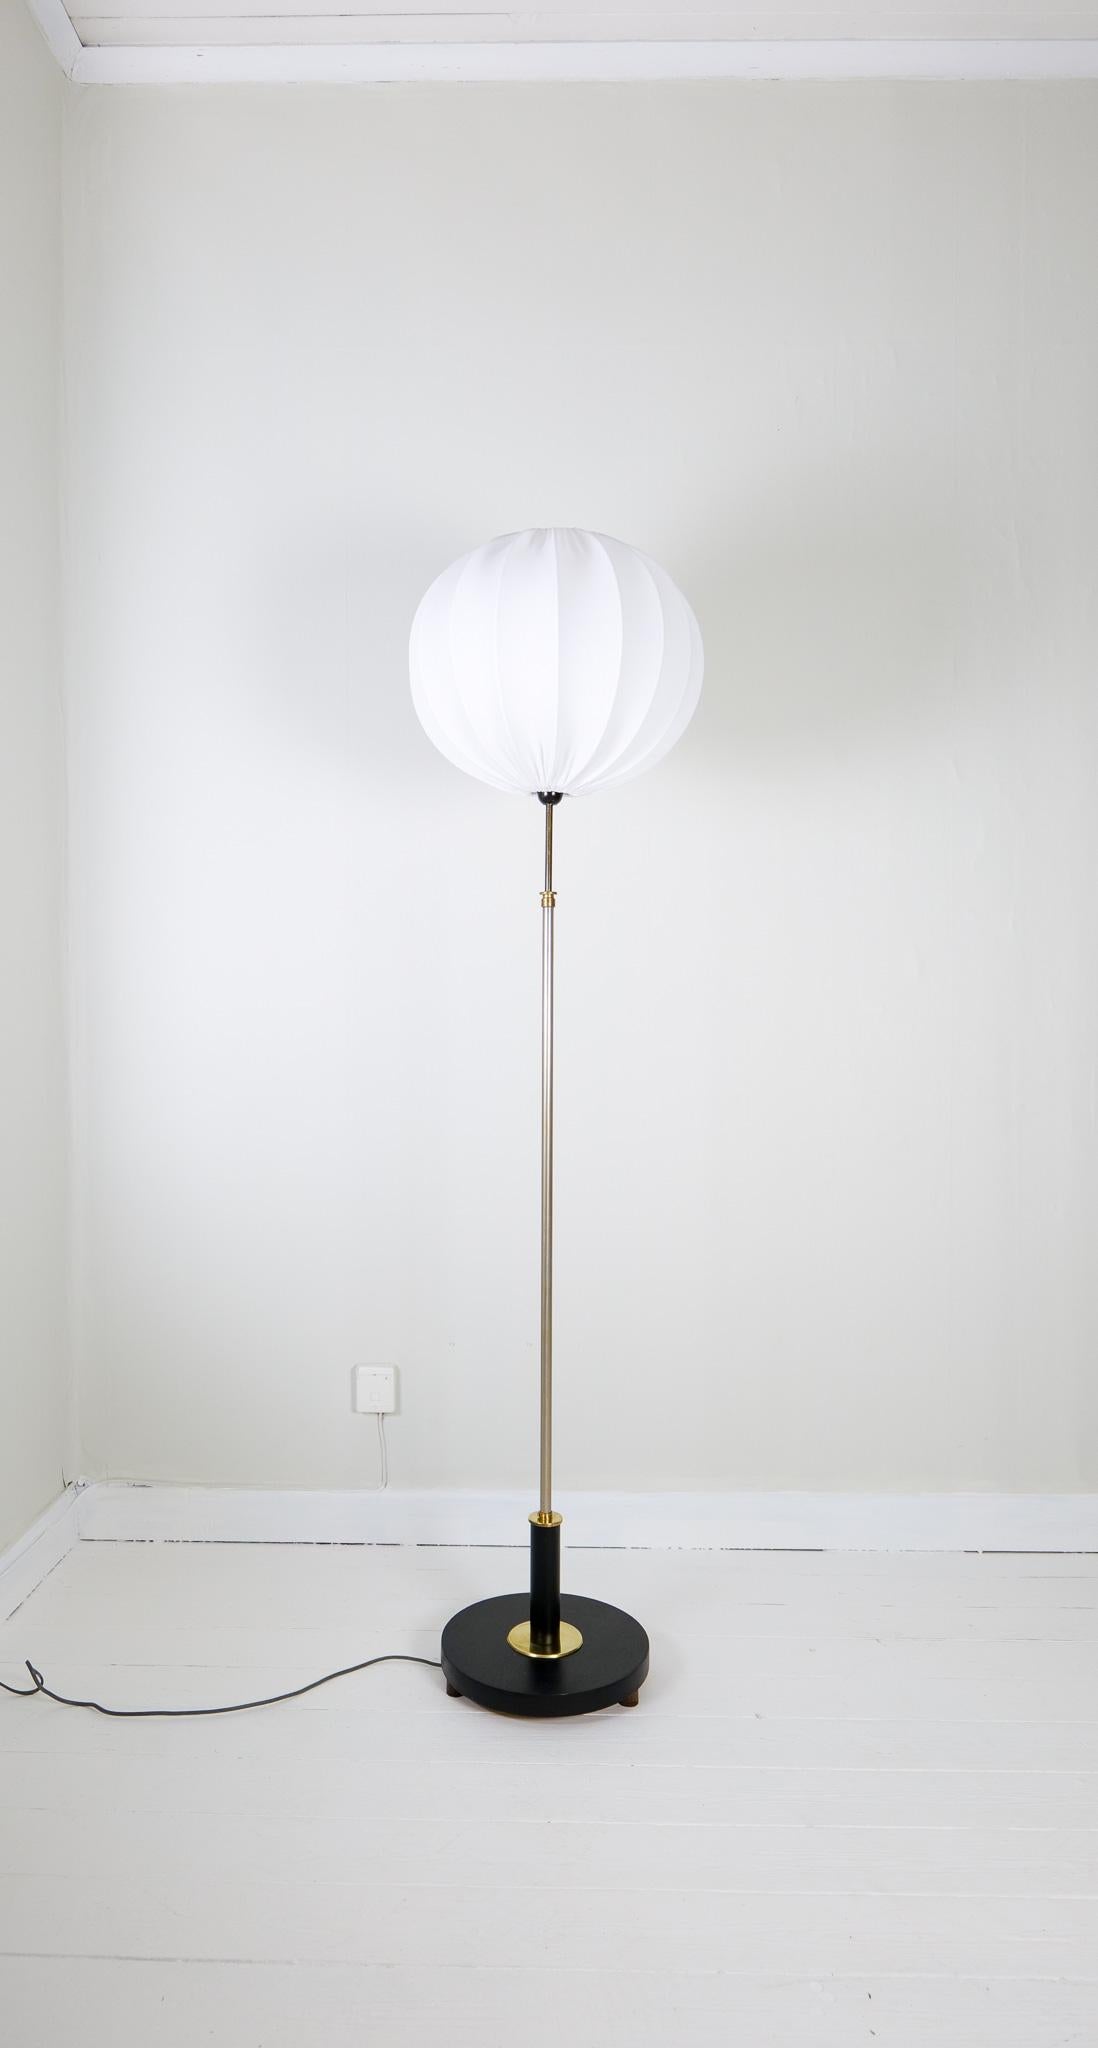 Art deco floor lamp made in a base of blackened wood and brass details with silver metal rod. The lamp can be adjustable in height. All around a good art deco looking floor lamp with a new round cotton shade.

Good vintage condition with some wear.